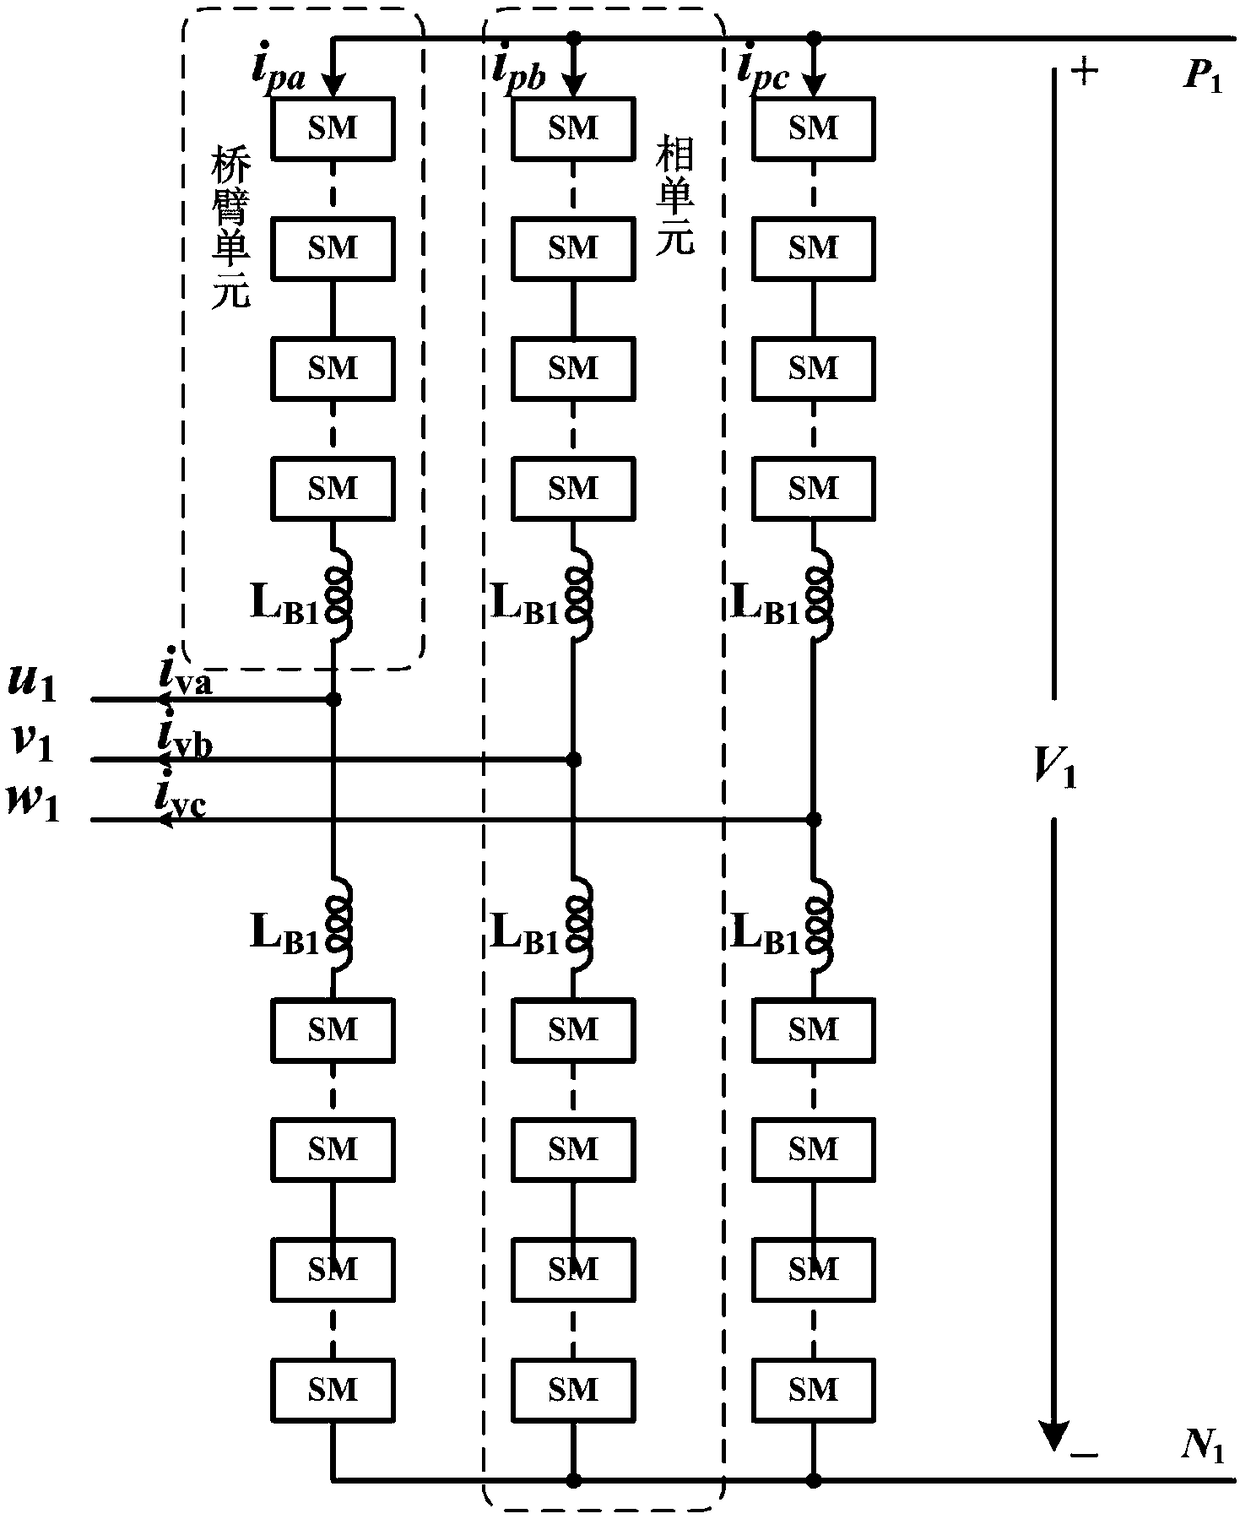 DC power distribution network energy router based on PWM/diode hybrid rectification structure, and control method for DC power distribution network energy router